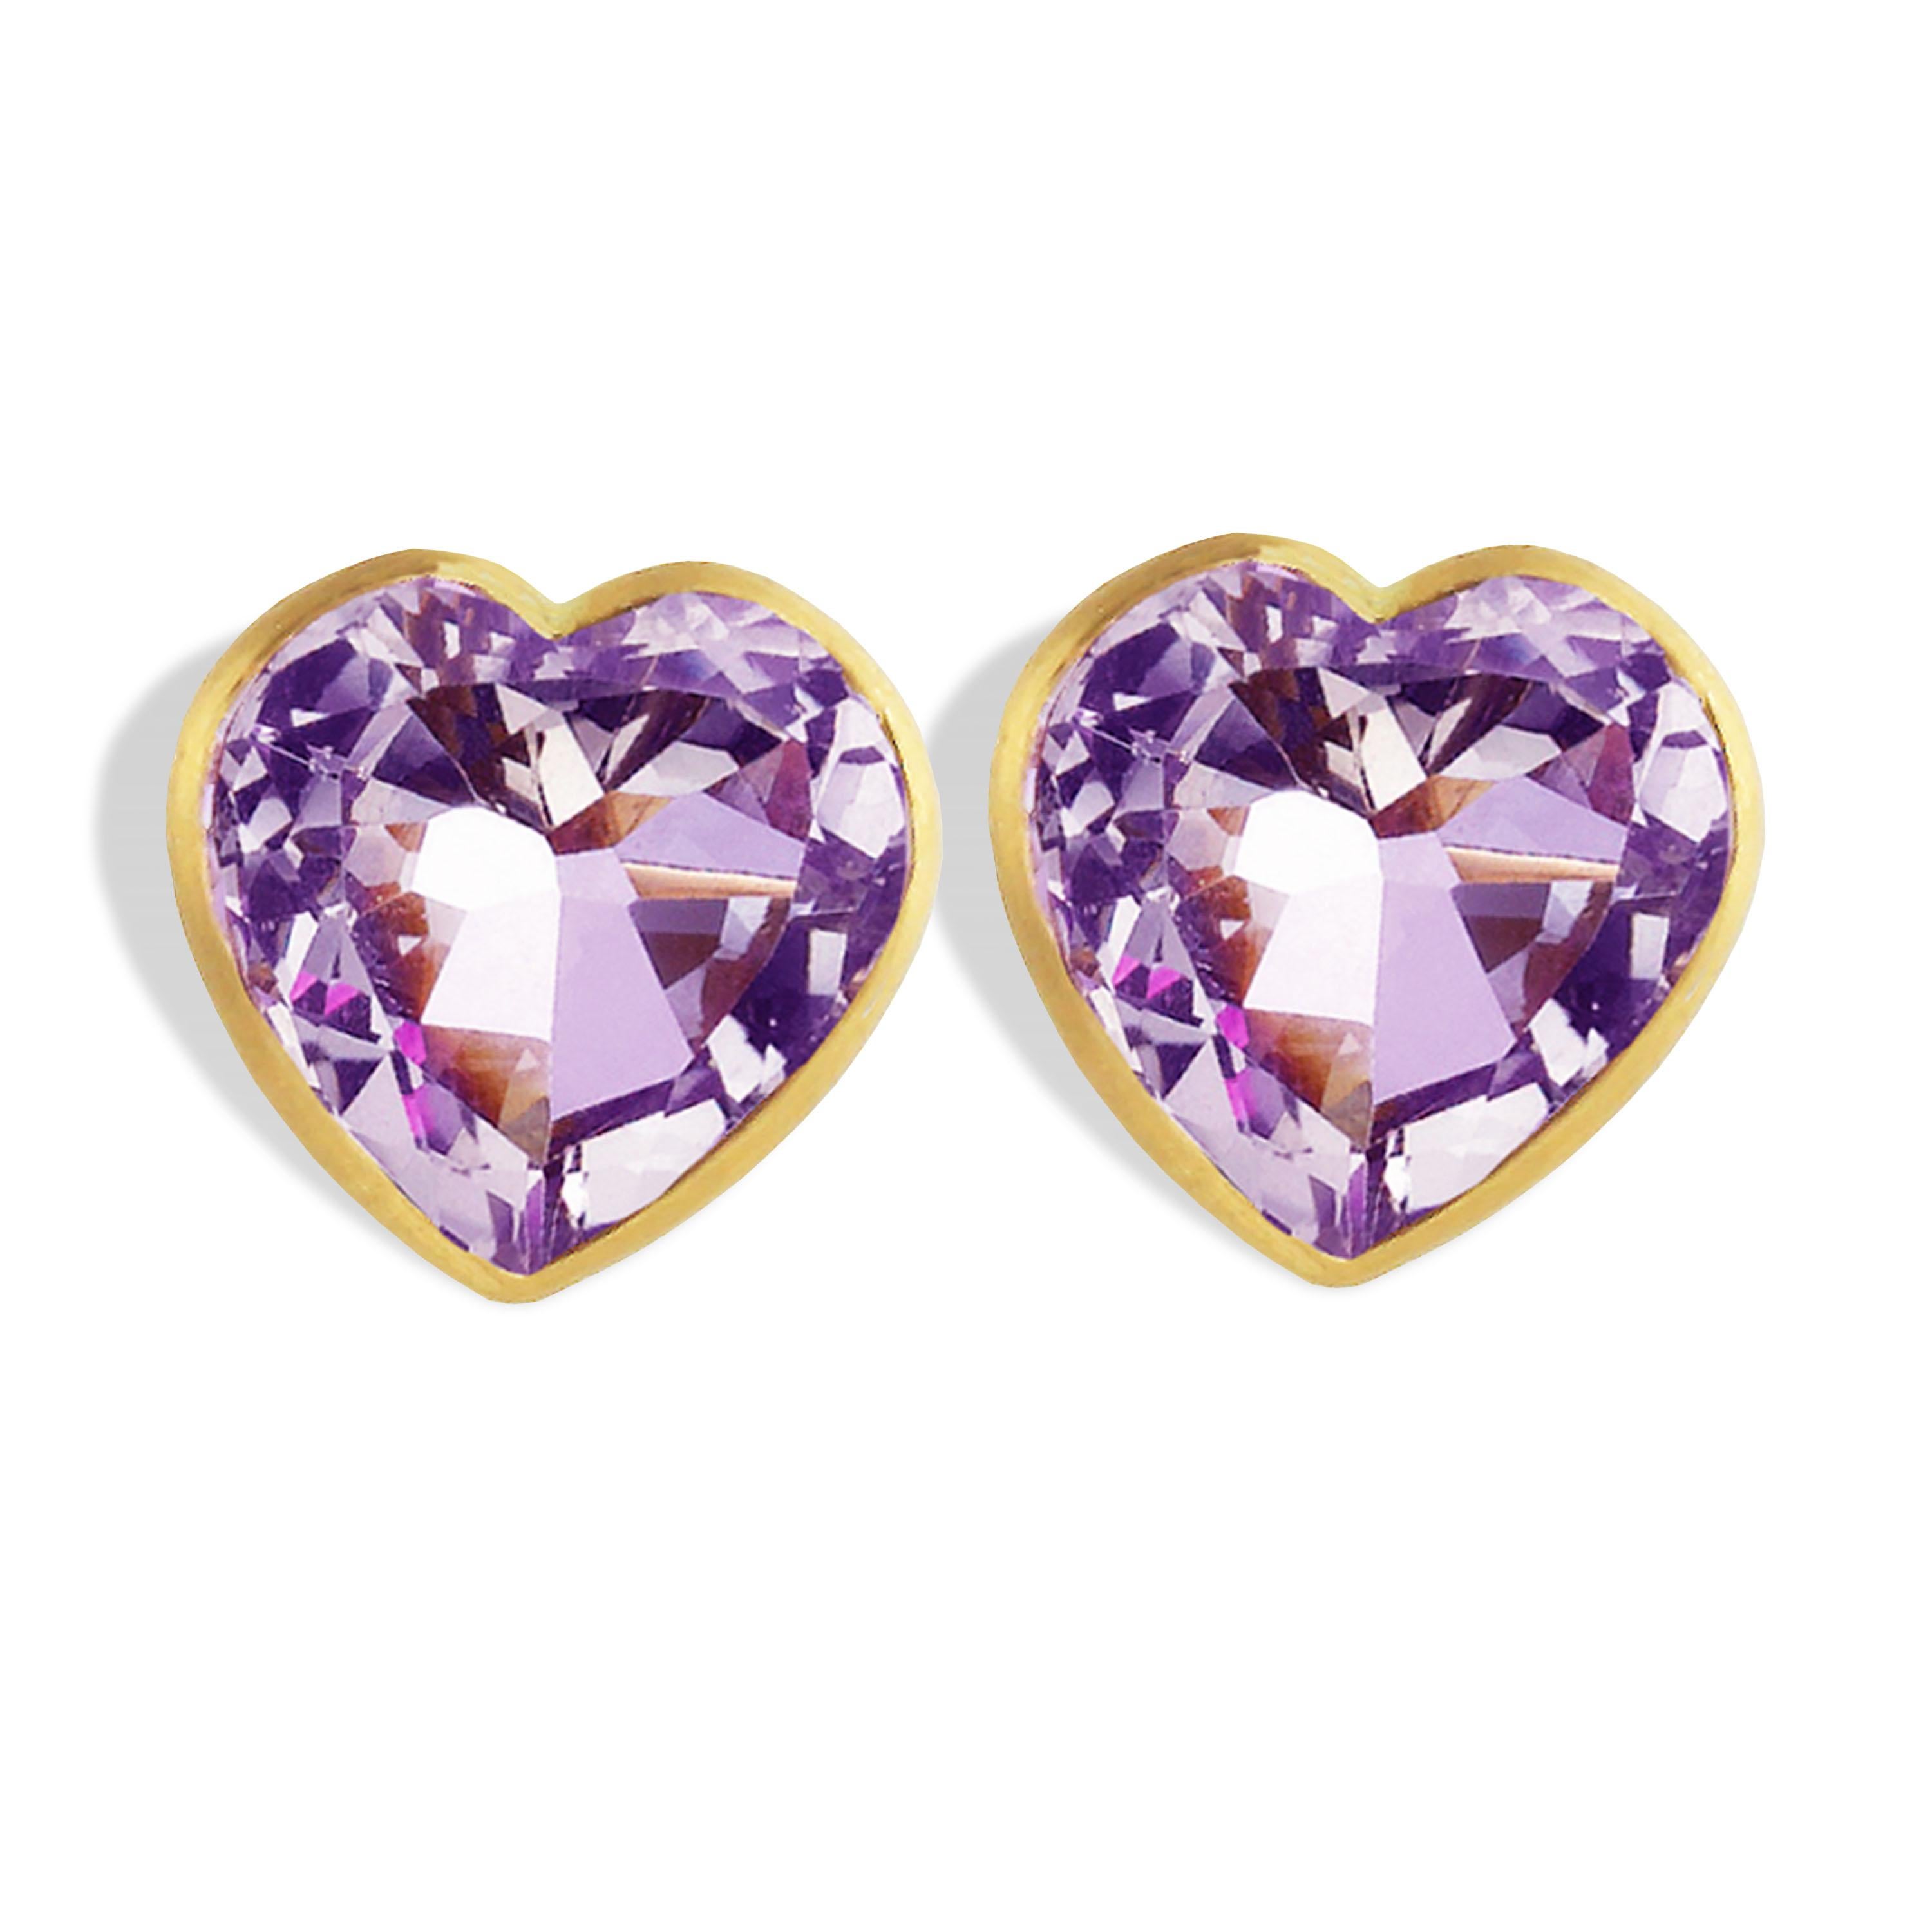 Purple Heart earrings featuring 5.89 carats of Brazilian Amethyst set in 22k gold.

Amethyst served royalty throughout history and was considered in ancient times to be a precious stone, worth as much as diamonds, rubies and emeralds.  As the stone